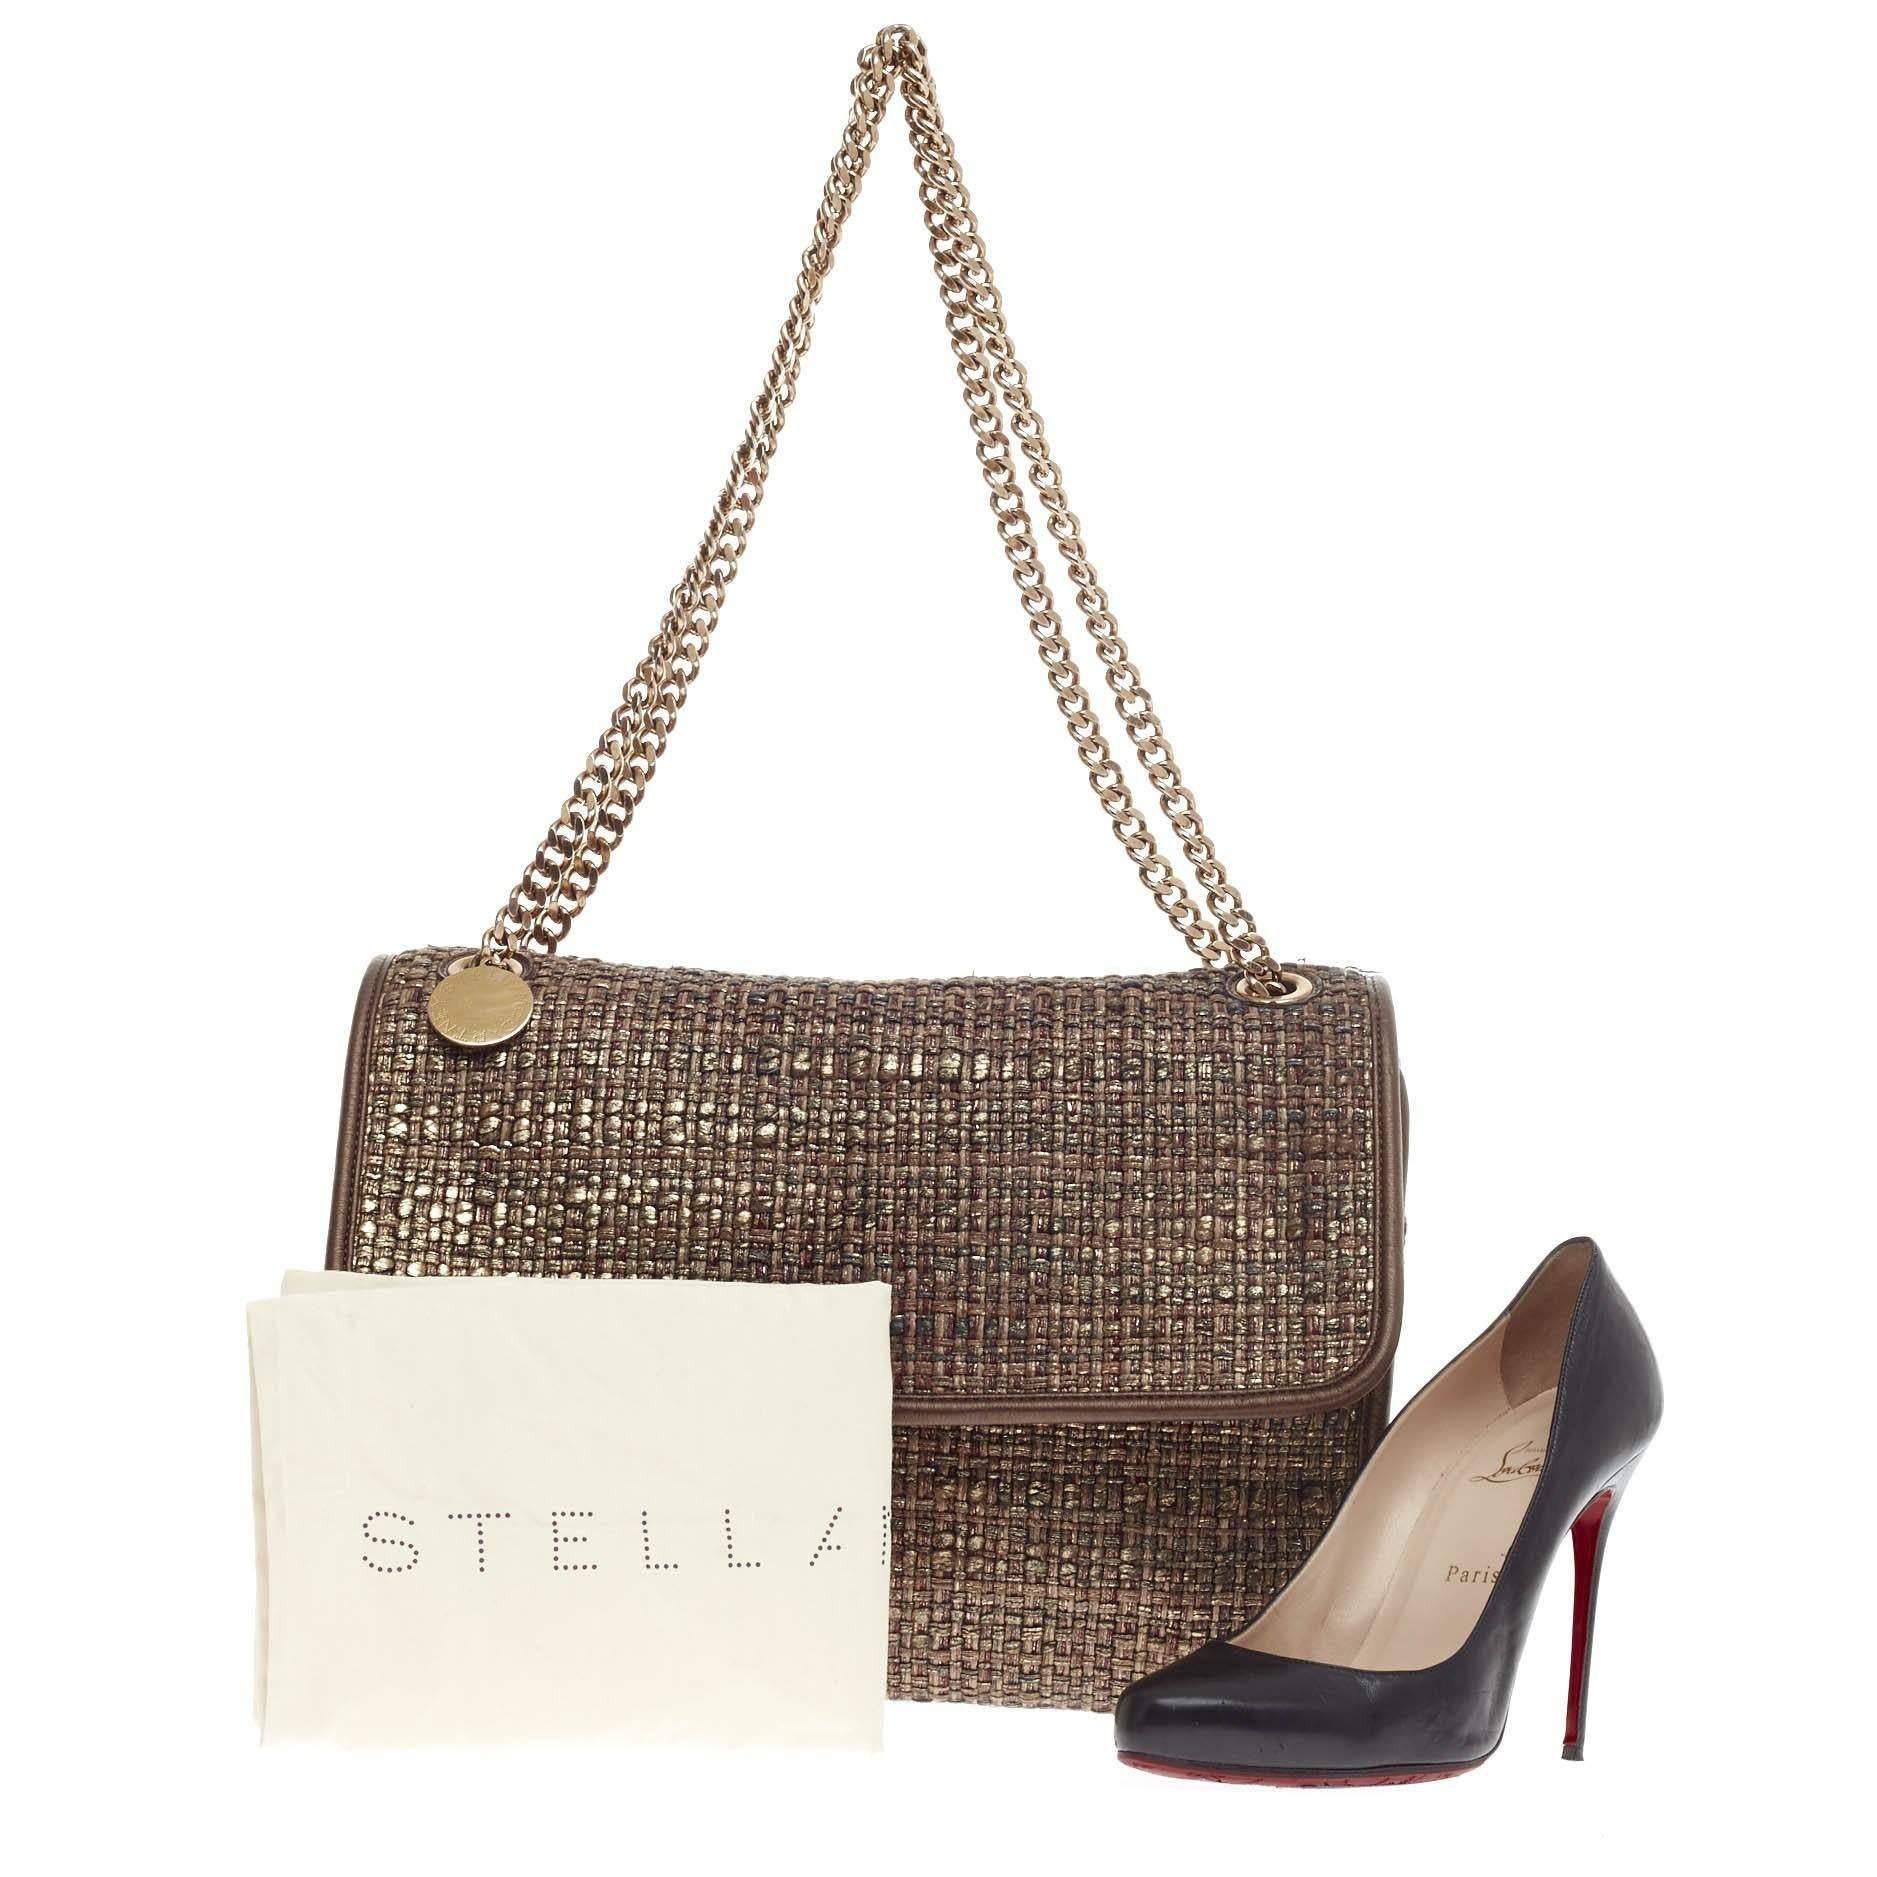 This authentic Stella McCartney Falabella Shoulder Bag Woven Tweed Medium is perfect for casual day-to-day excursions. Crafted in eye-catching gold and metallic brown interwoven tweed, this soft bag features bronze metal chain link strap and frontal